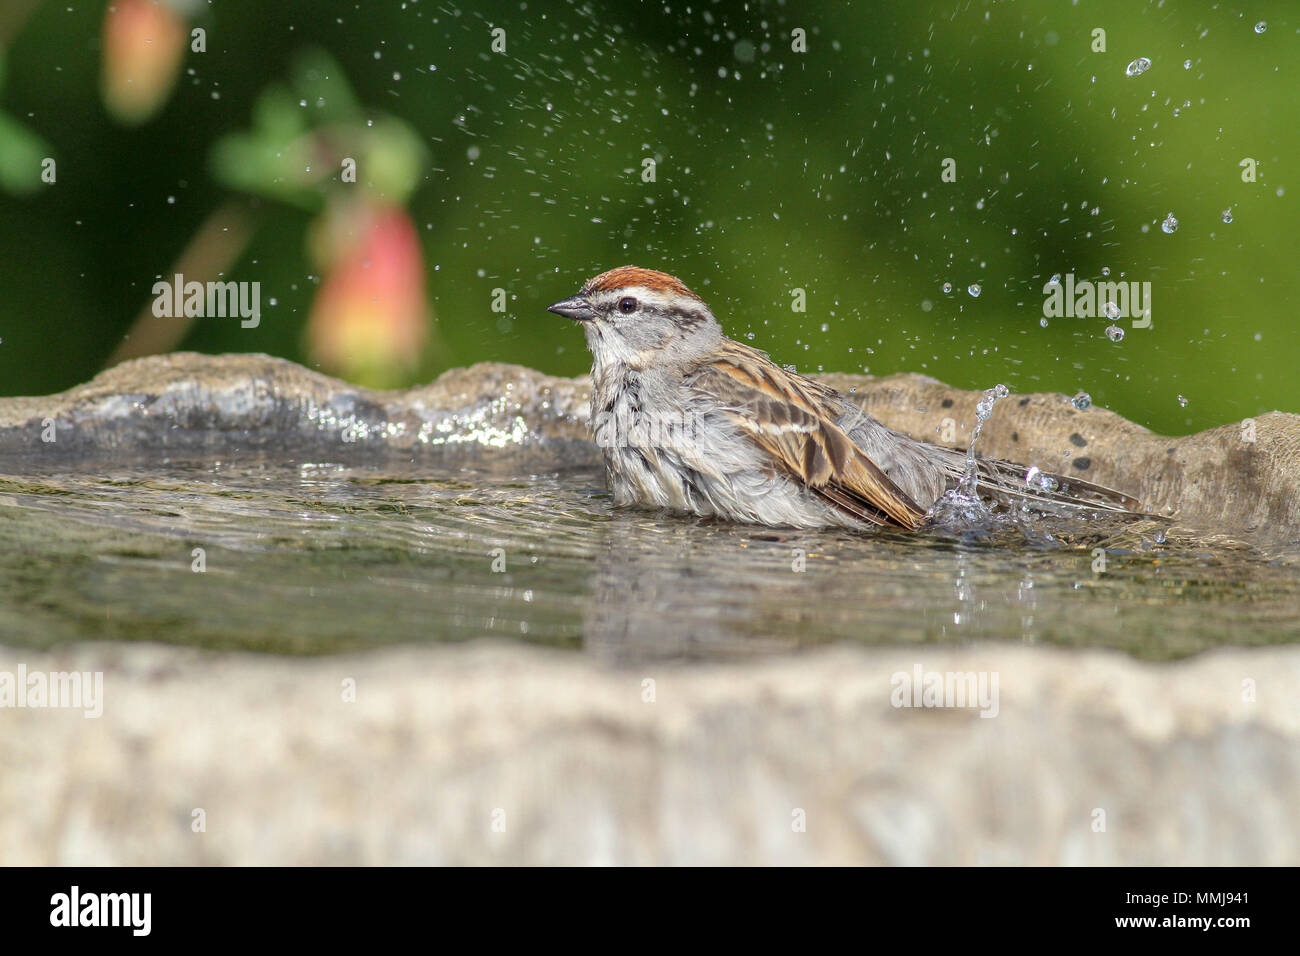 Chipping sparrow taking a bath Stock Photo